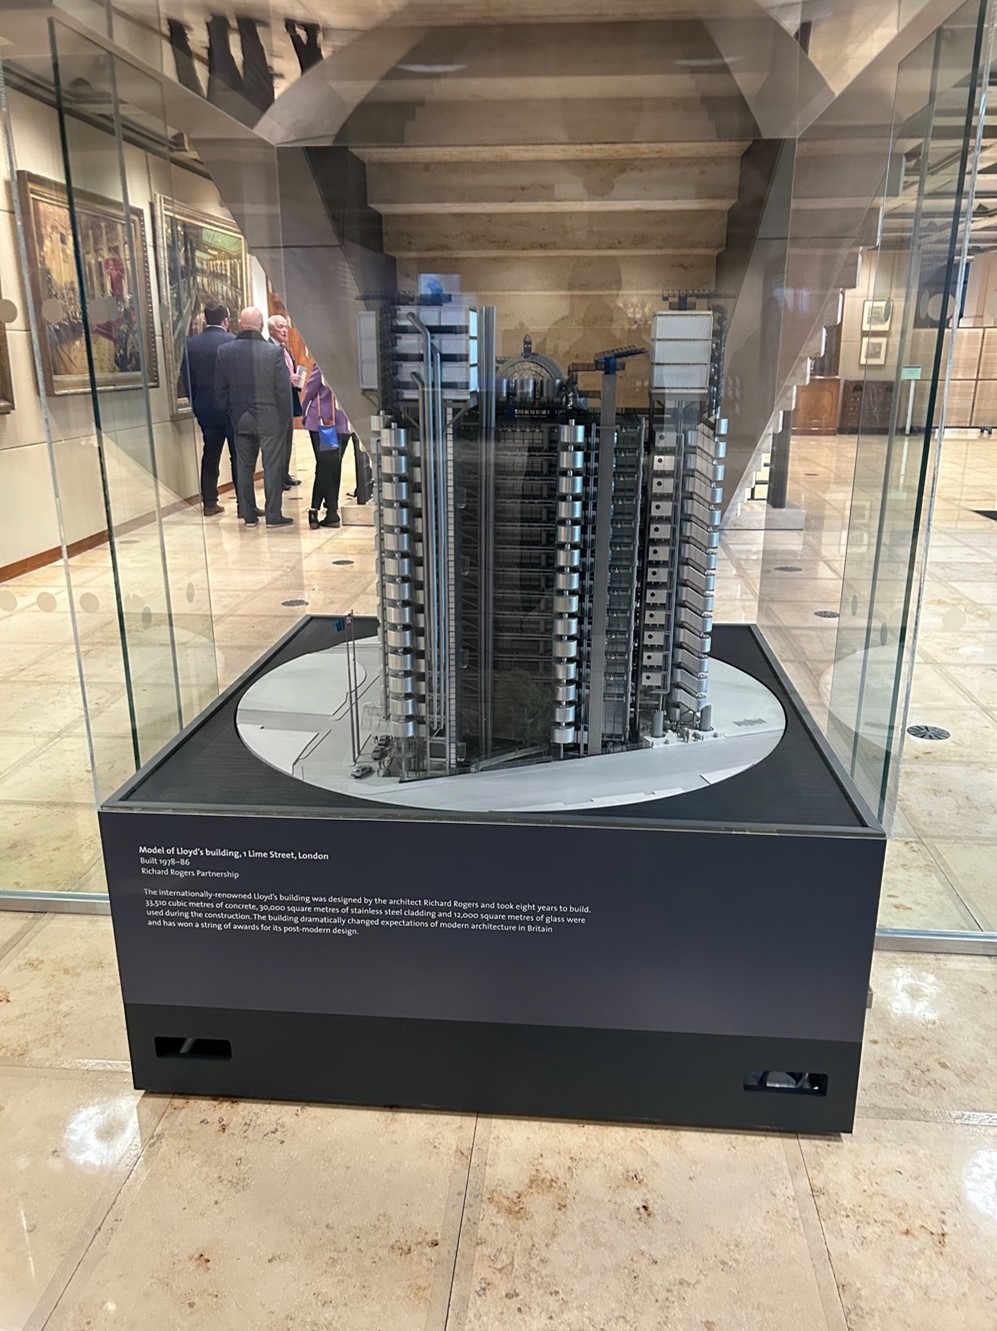 Photo of a scale model of the Lloyds of London building in a display case.